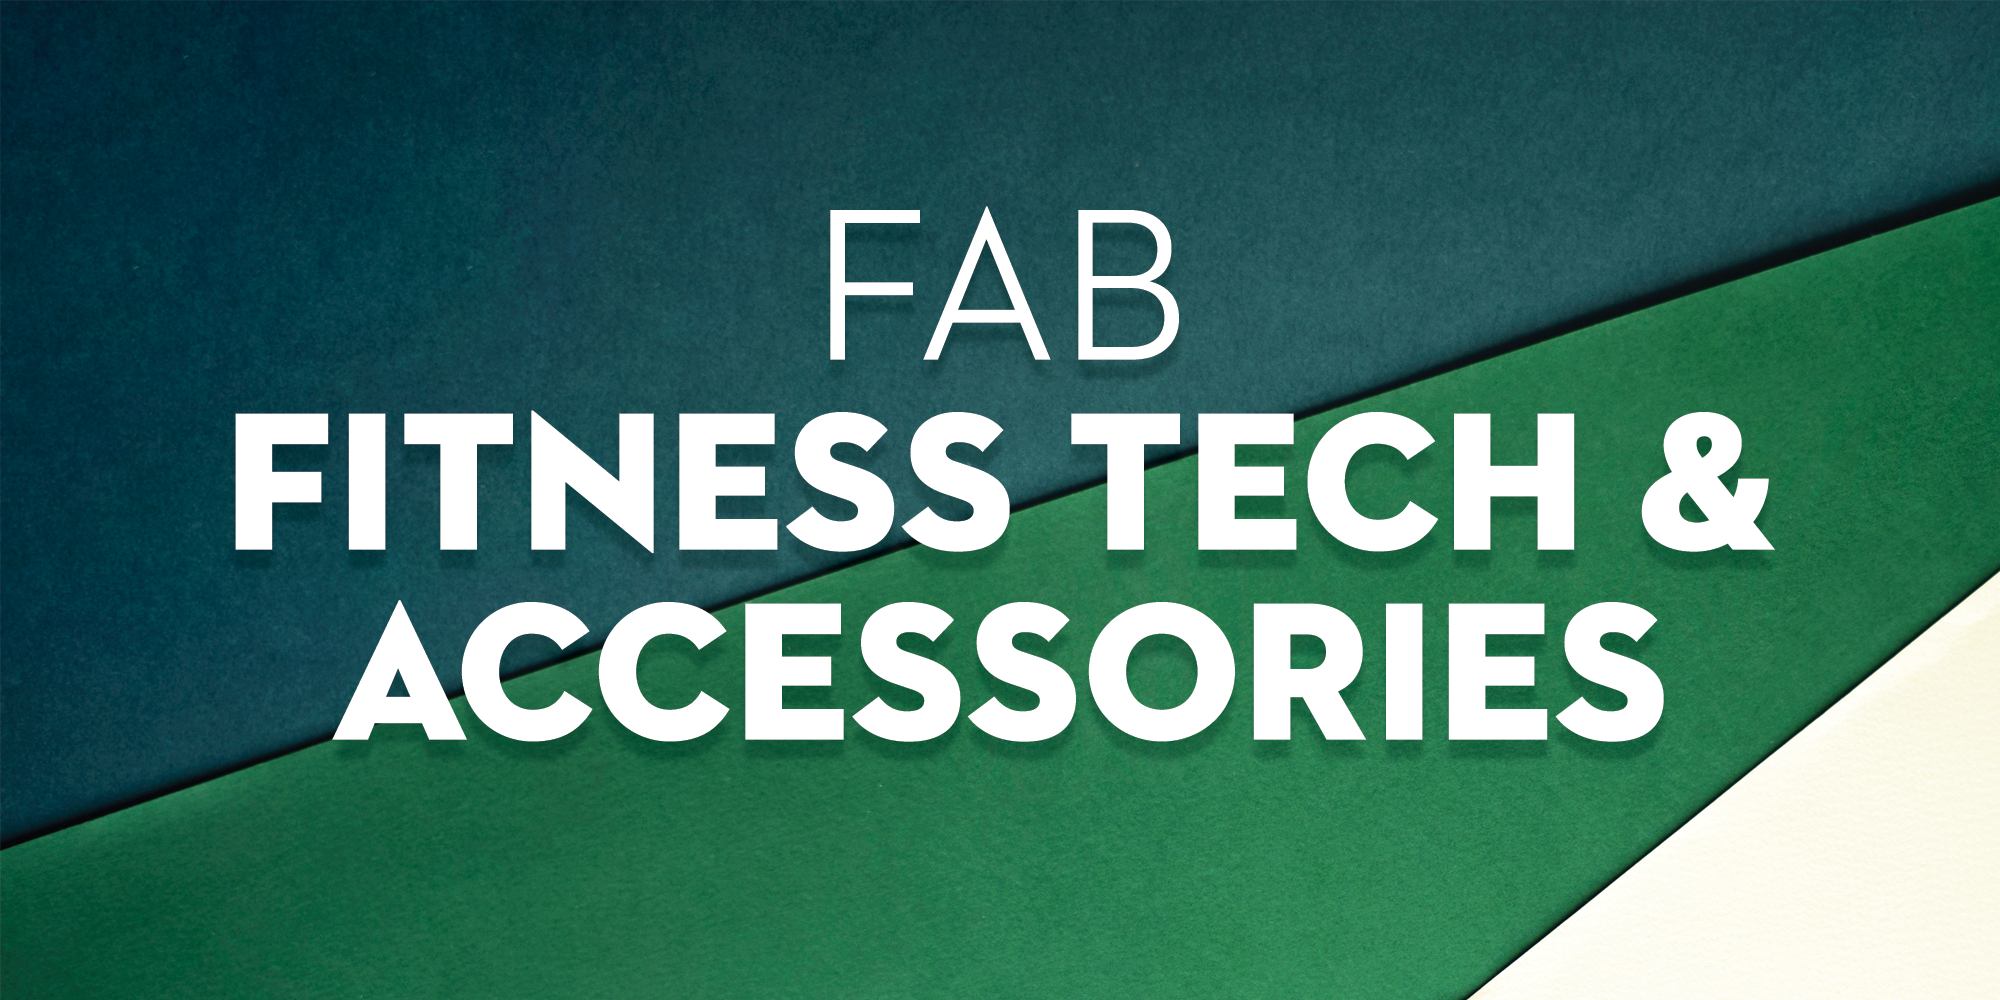 tech and accessories